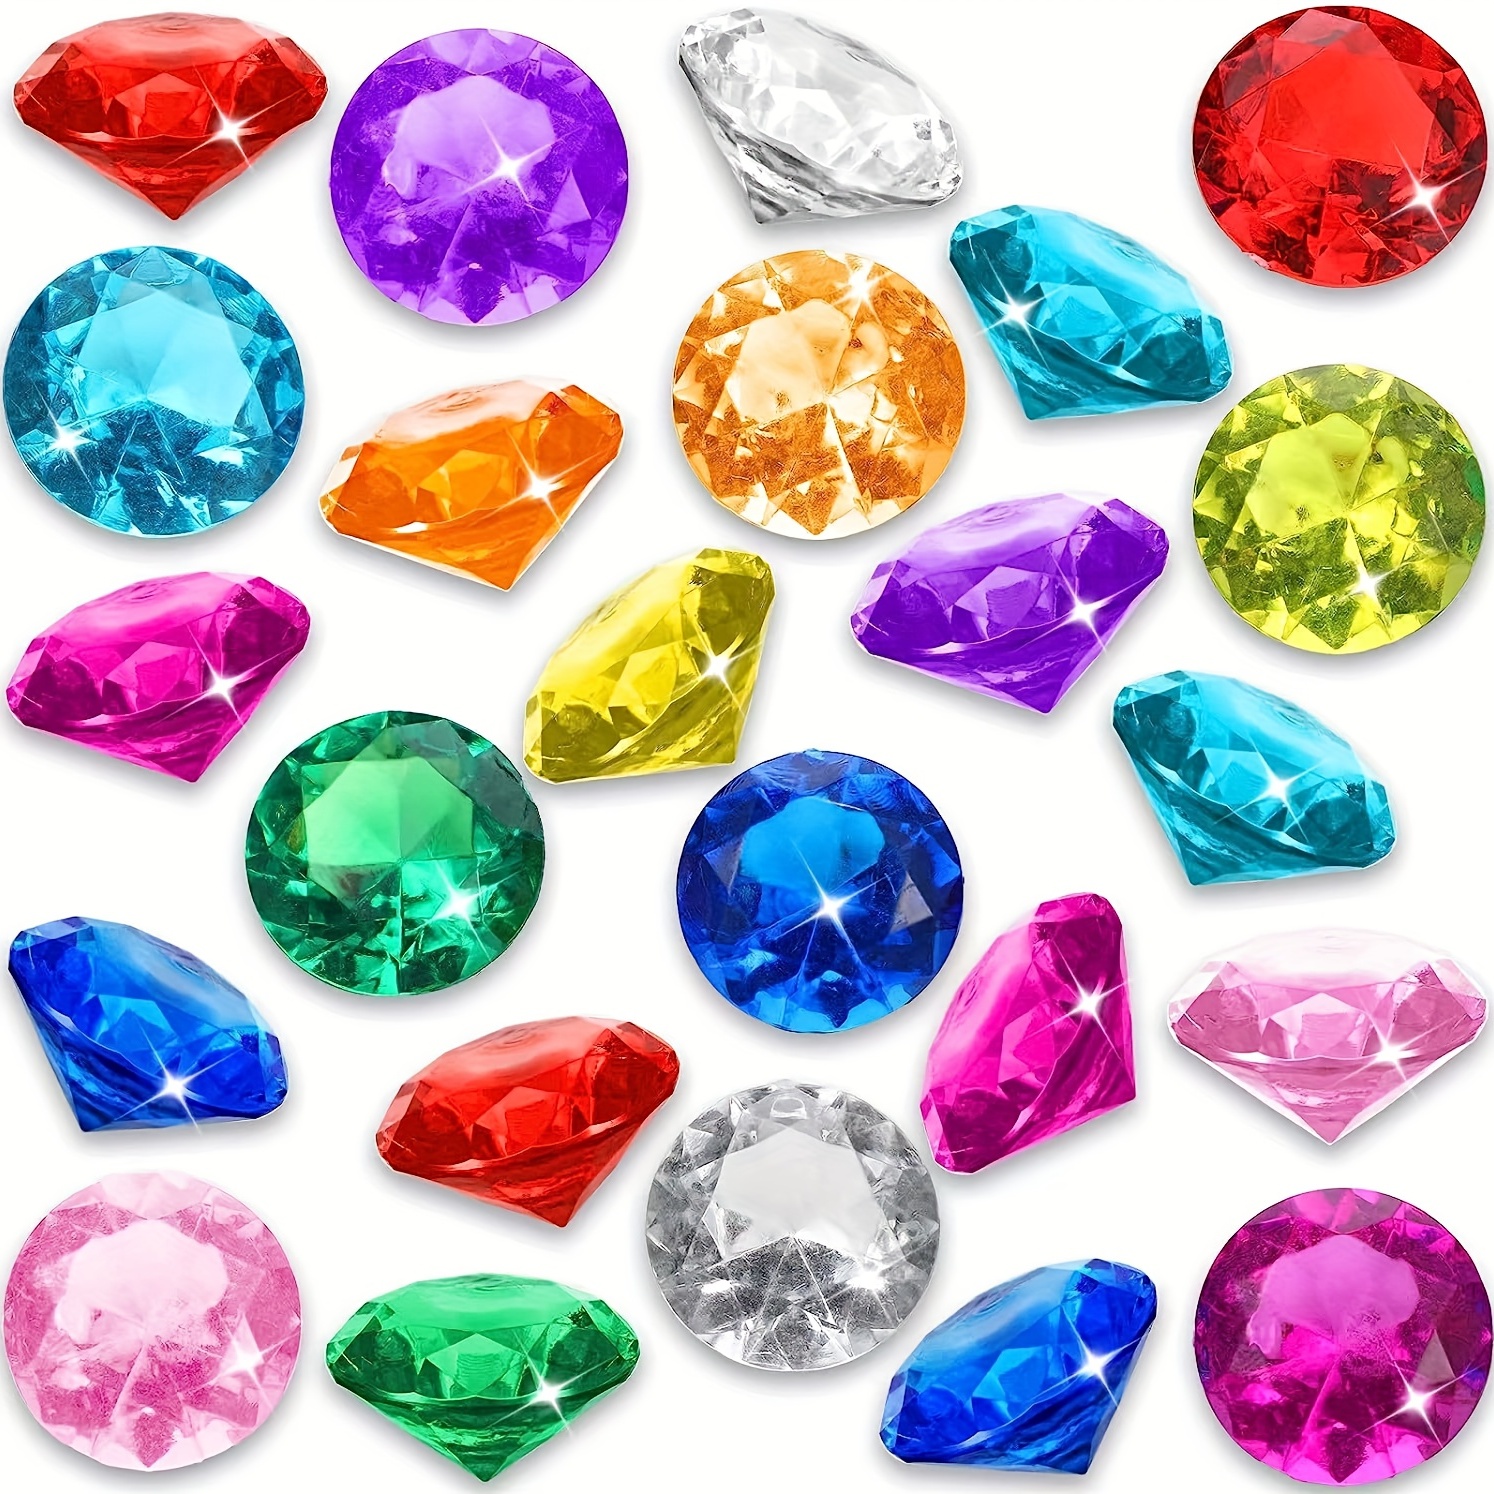 

40pcs Diving Gems Pool Toys, Large Acrylic Gems Big Gems Pirate Summer Underwater Swimming Toys For Birthday Swimming Pool Party Favors